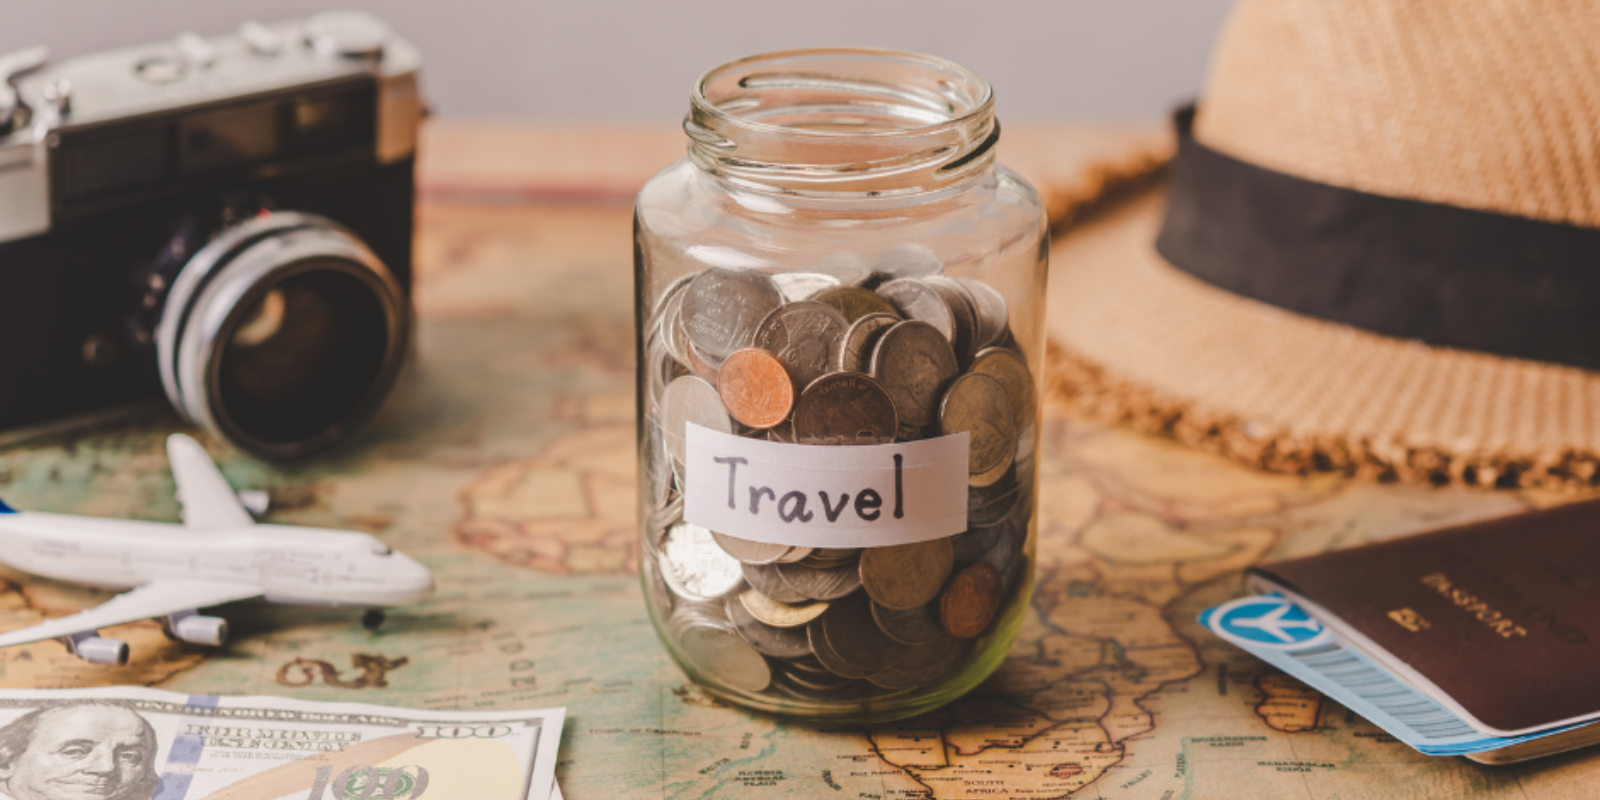 A jar full of coins labeled "Travel" on a map, suggesting saving money for travel, with a vintage camera, a straw hat, a model airplane, and a passport, alluding to planning and preparing for a journey or vacation.